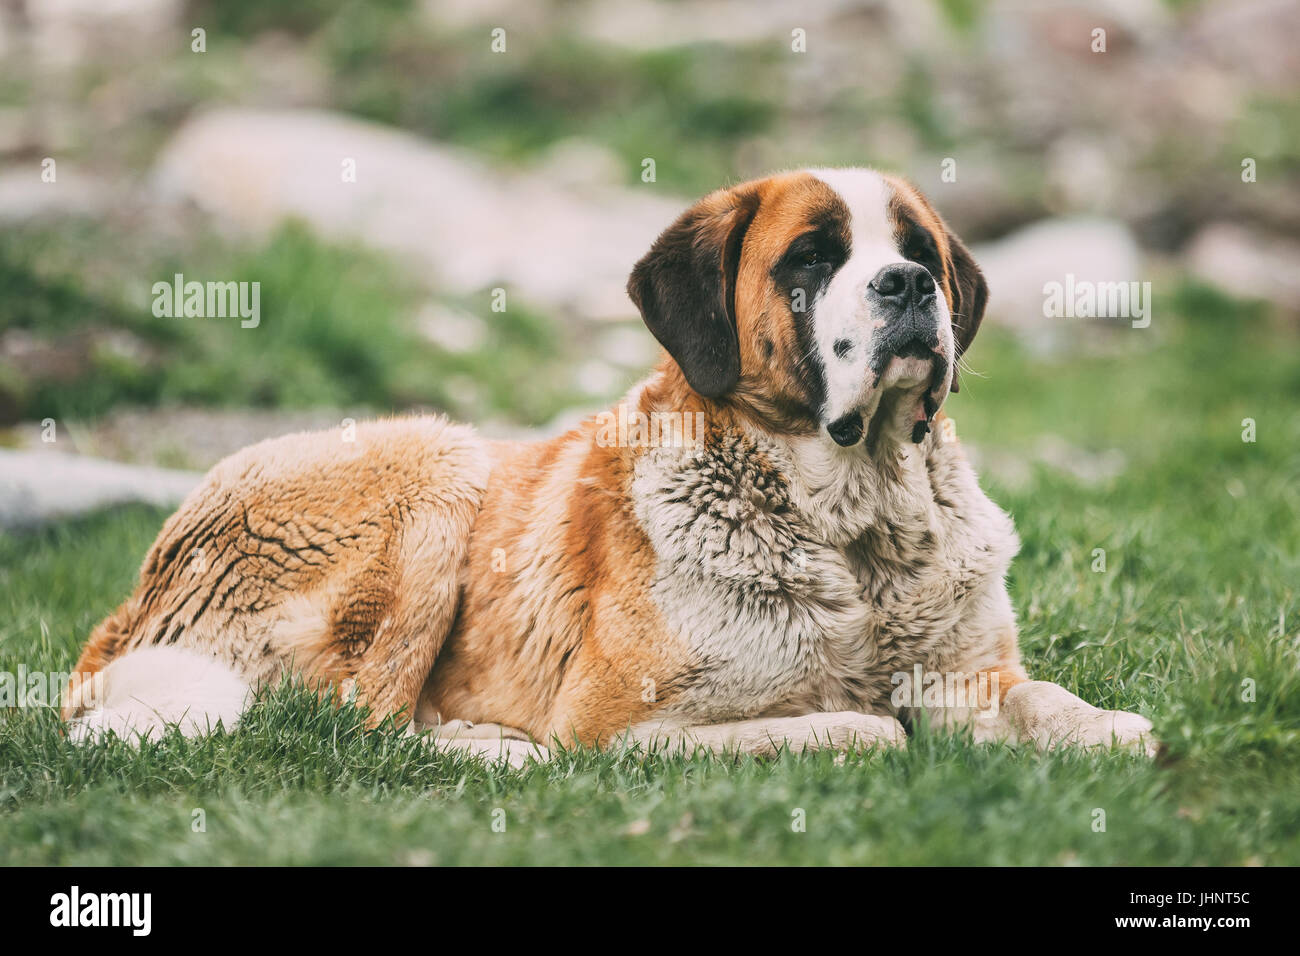 St. Bernard Or St Bernard Dog Sit Outdoor In Green Spring Meadow. The St. Bernard Or St Bernard Is A Breed Of Very Large Working Dog From The Western  Stock Photo